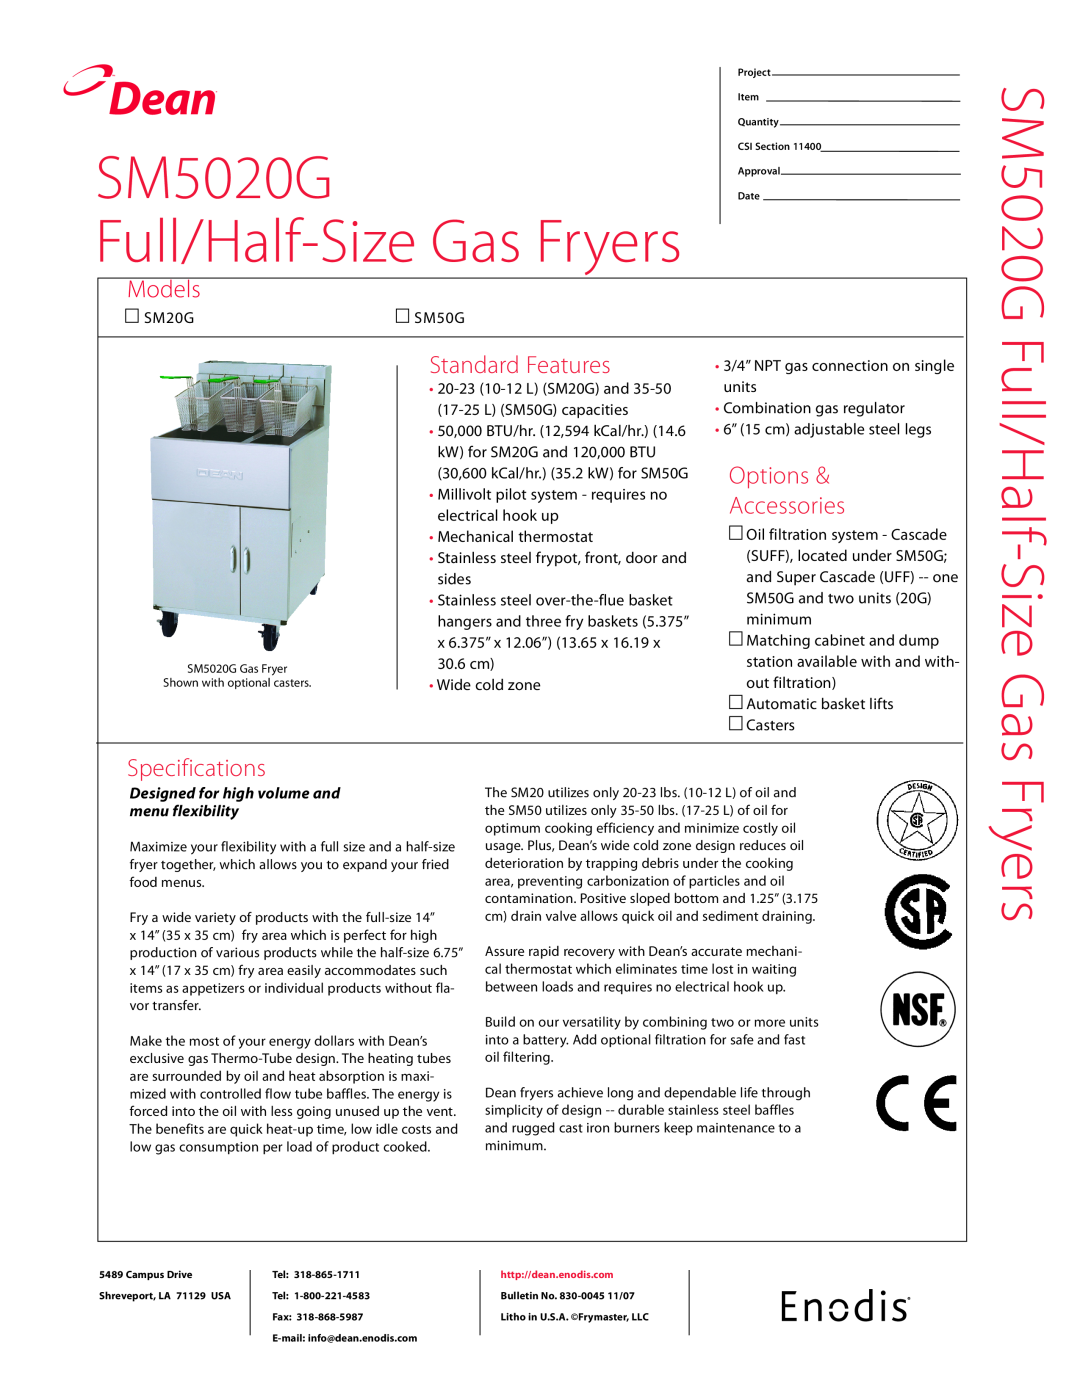 Frymaster specifications Dean, SM5020G Full/Half-Size Gas Fryers, Models, Standard Features, Specifications 